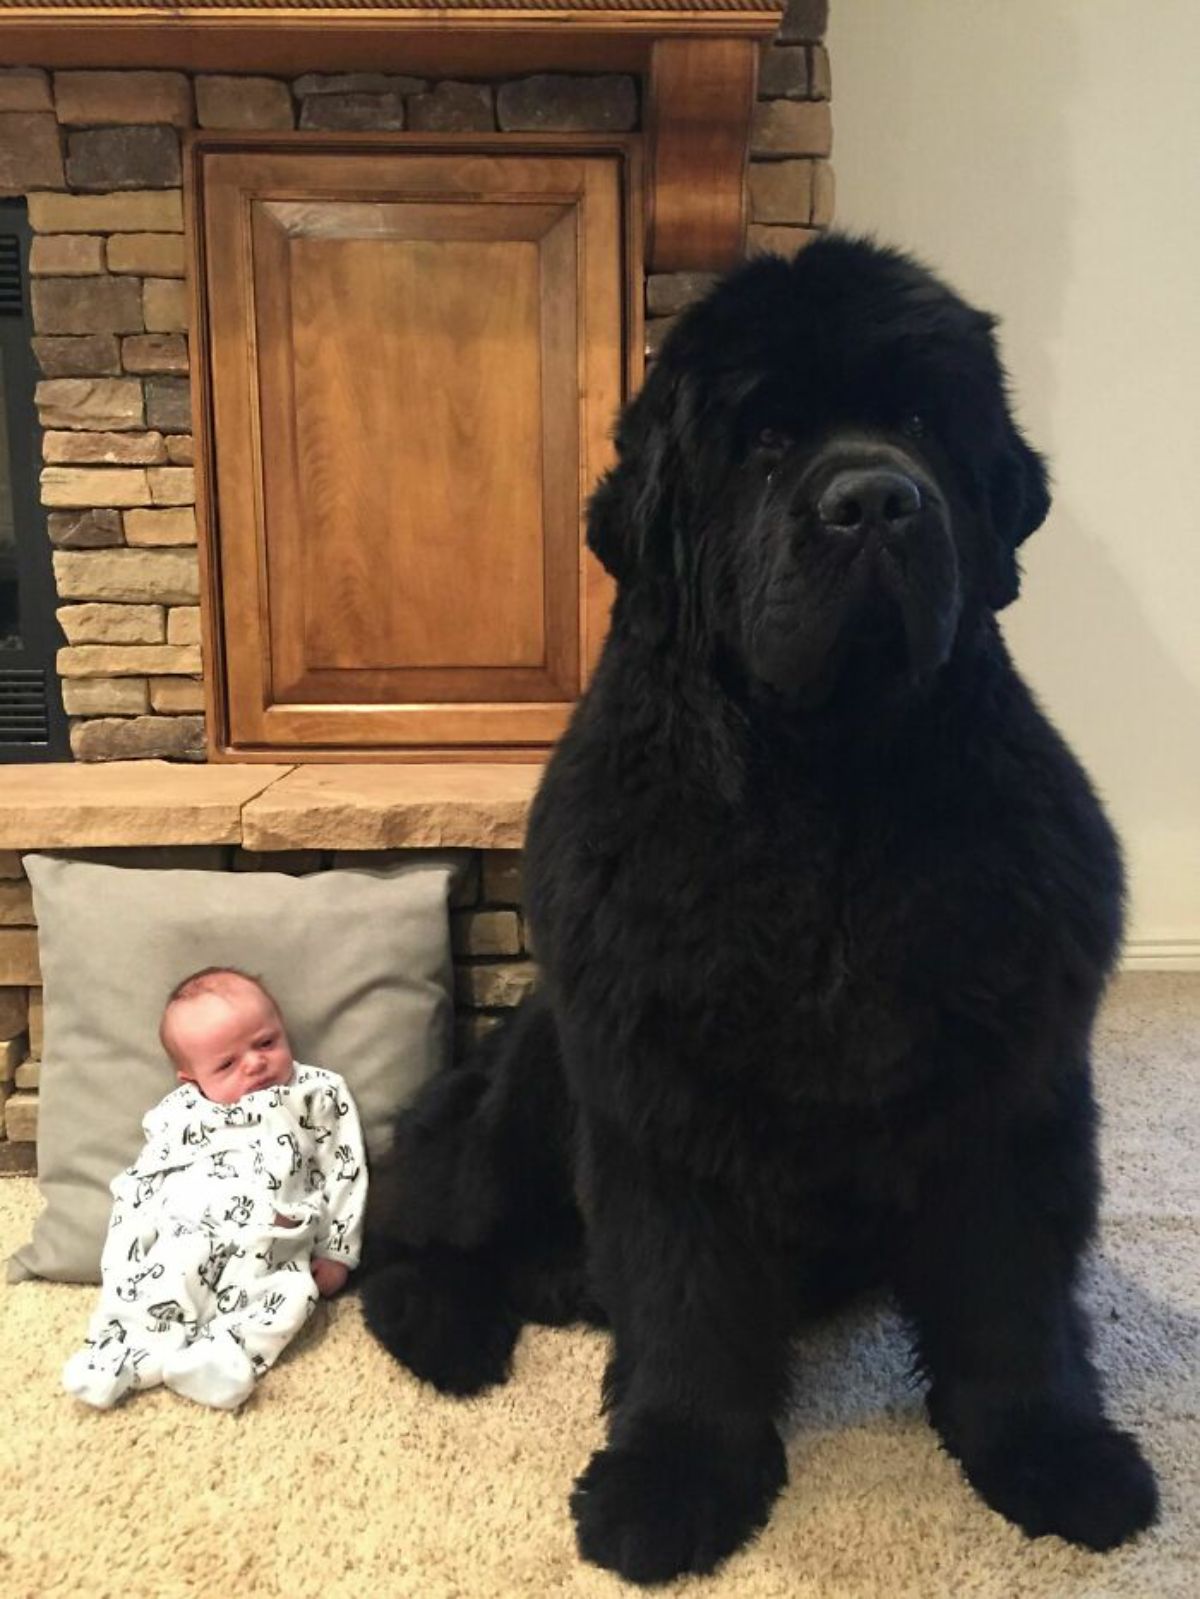 large black newfoundland sitting next to a baby sitting on the floor leaning against a cushion